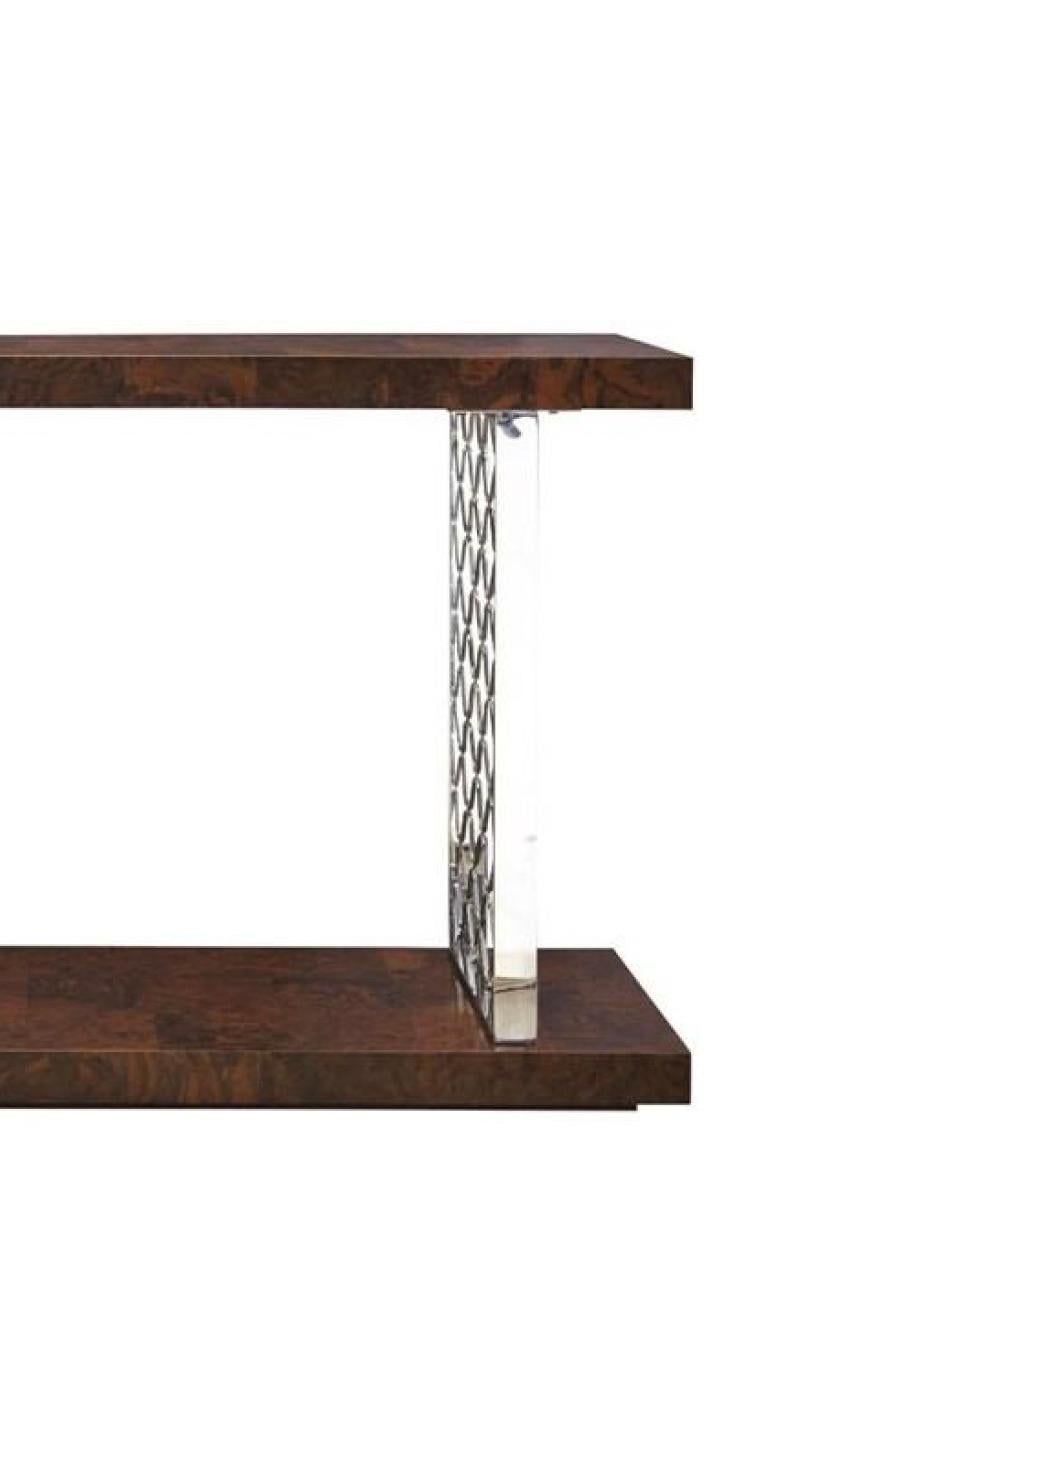 Contemporary Modern Burl Wood Console Table with Polished Chrome Legs